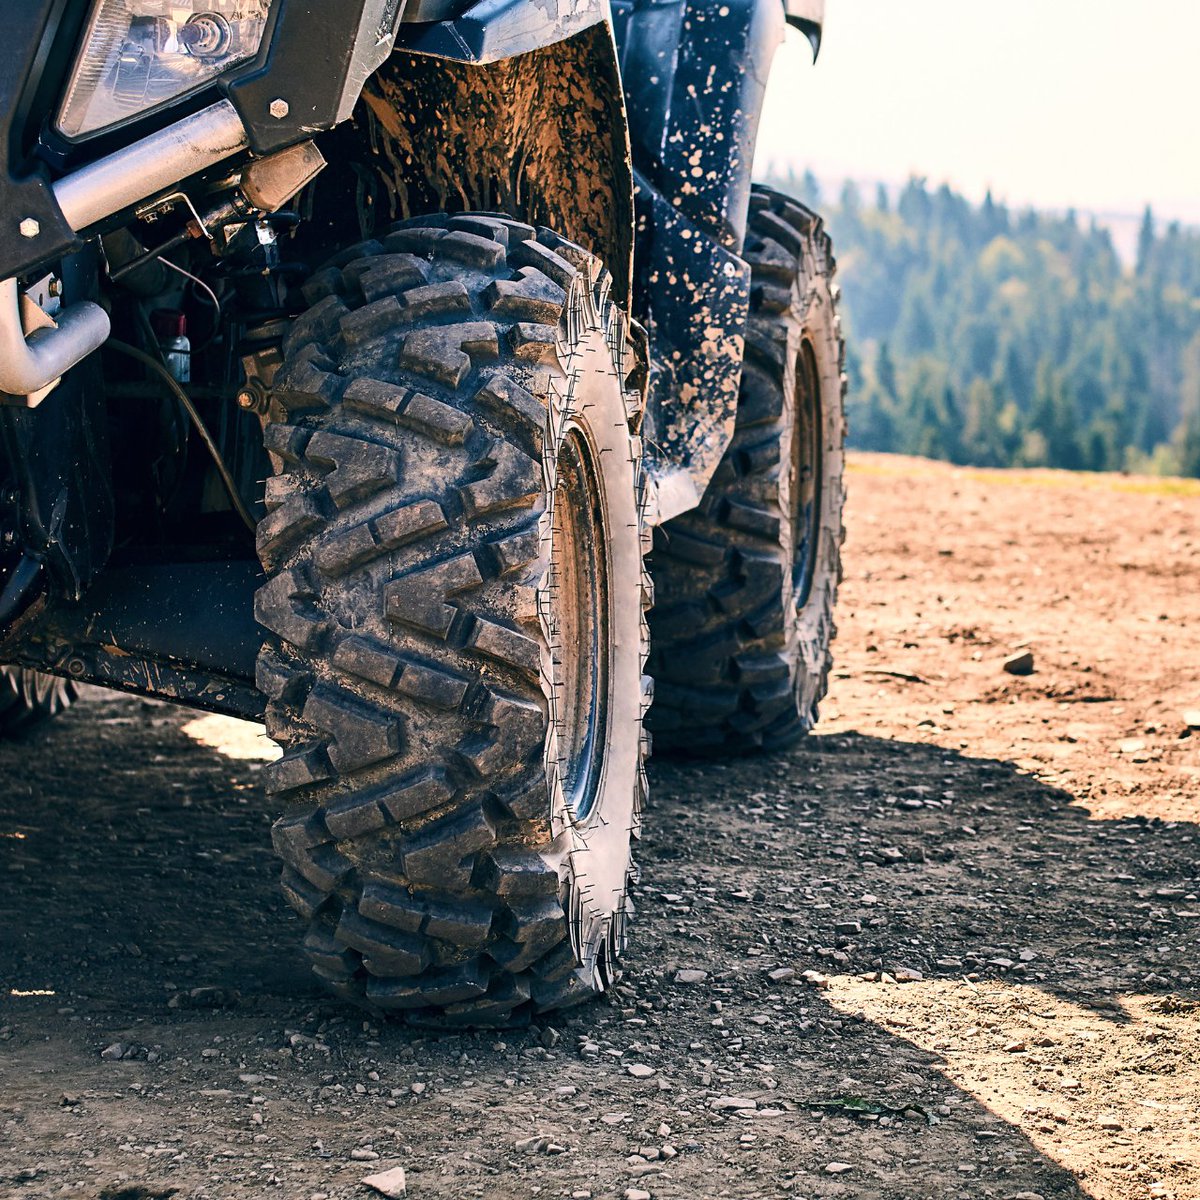 We generate business for powersports rental companies & tour operators. ⁠
⁠
You focus on running the business, we'll handle the marketing and lead generation. ⚡️

#atvrentals #utvrentals #jetskirentals #jeeprentals #motorcyclerentals